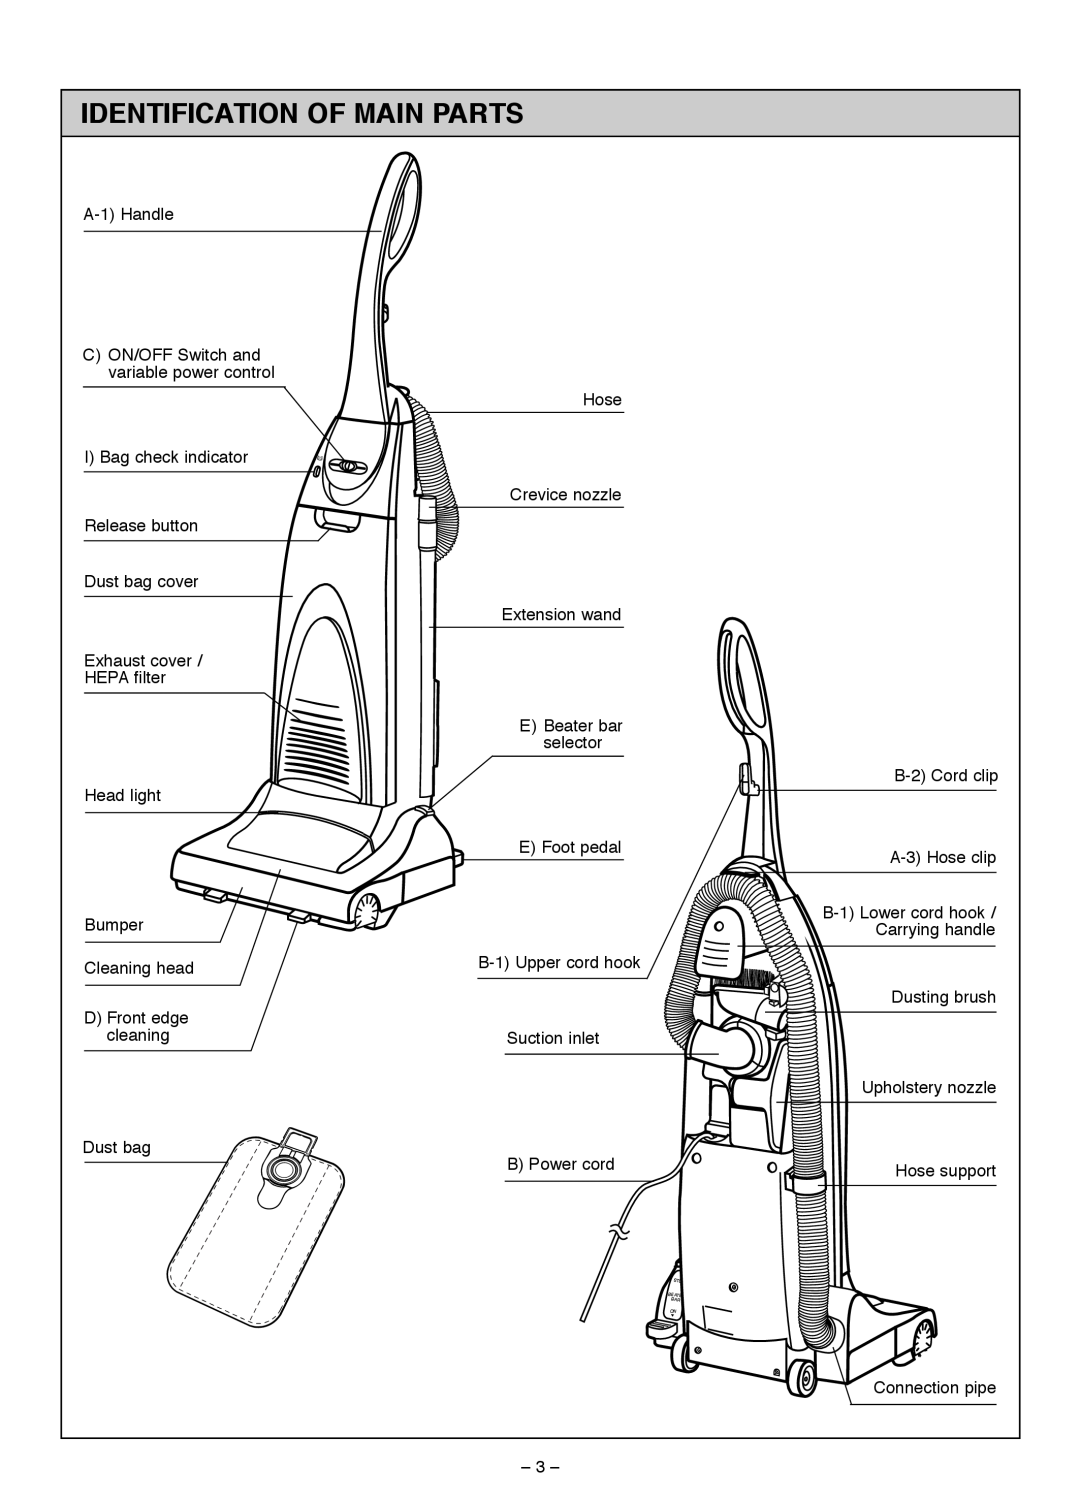 Miele S185 important safety instructions Identification Of Main Parts 